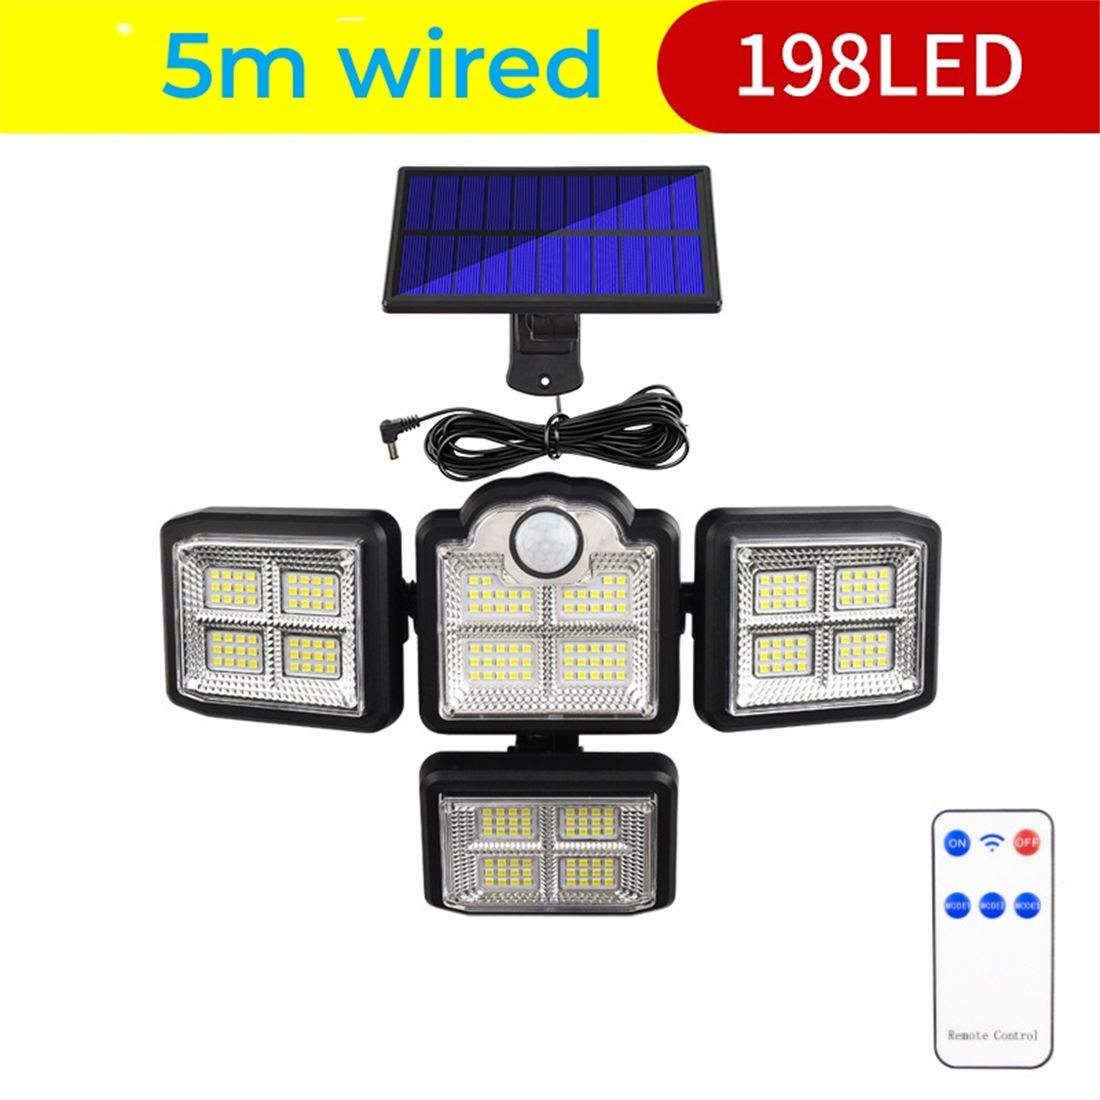 Wired 198led